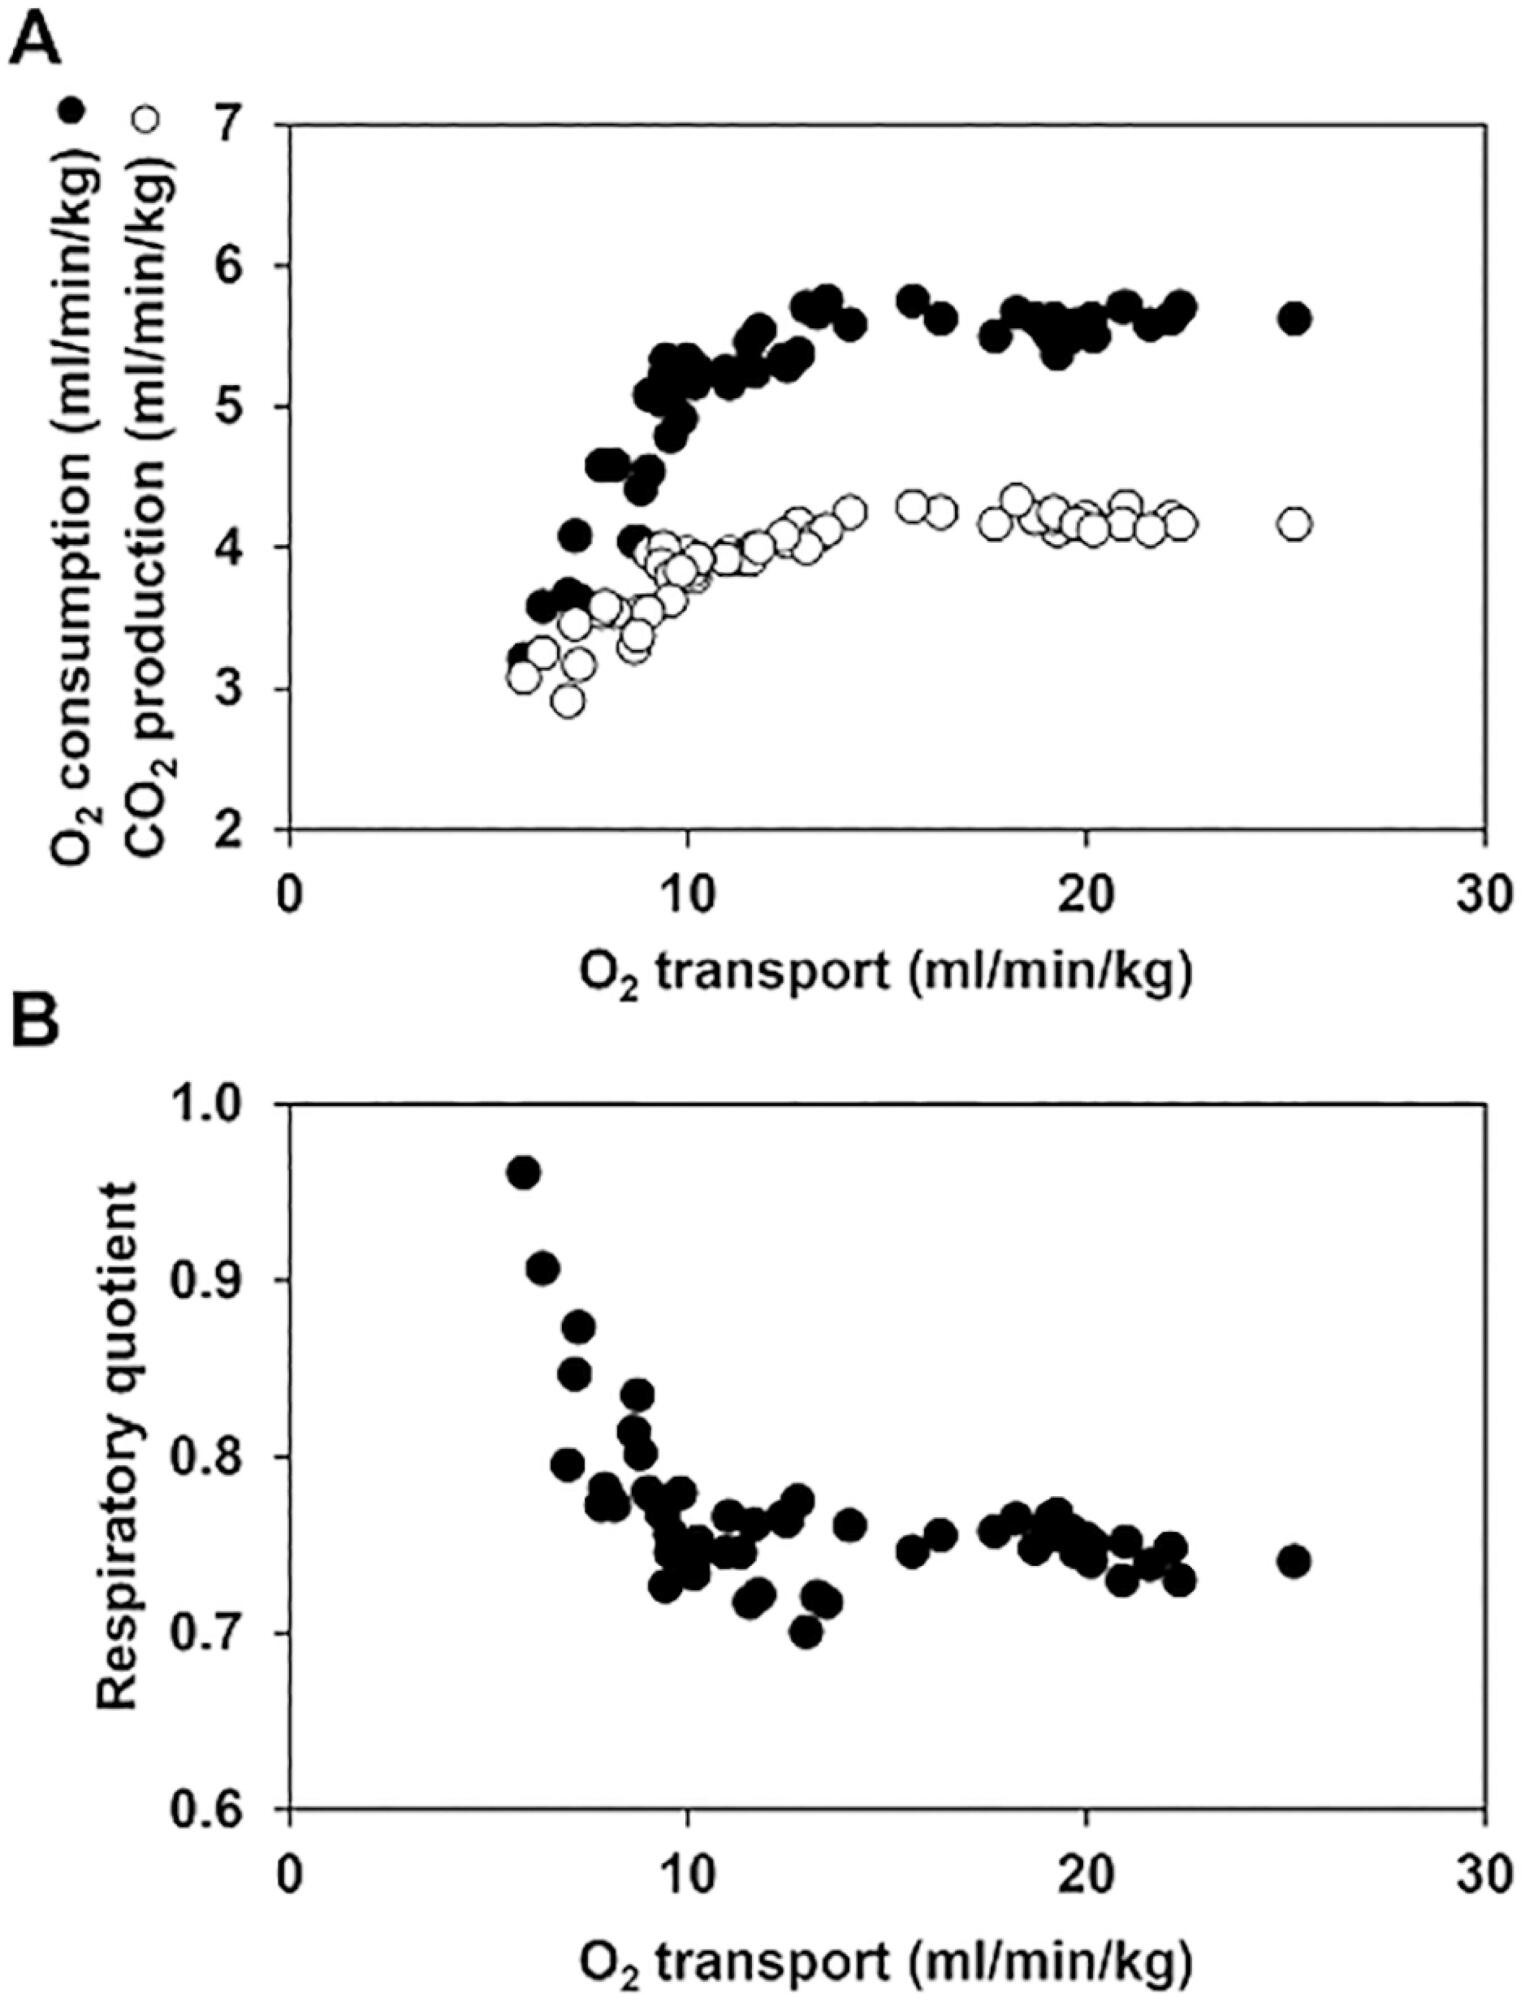 Central venous minus arterial carbon dioxide pressure to arterial minus central venous oxygen content ratio as an indicator of tissue oxygenation: a narrative review